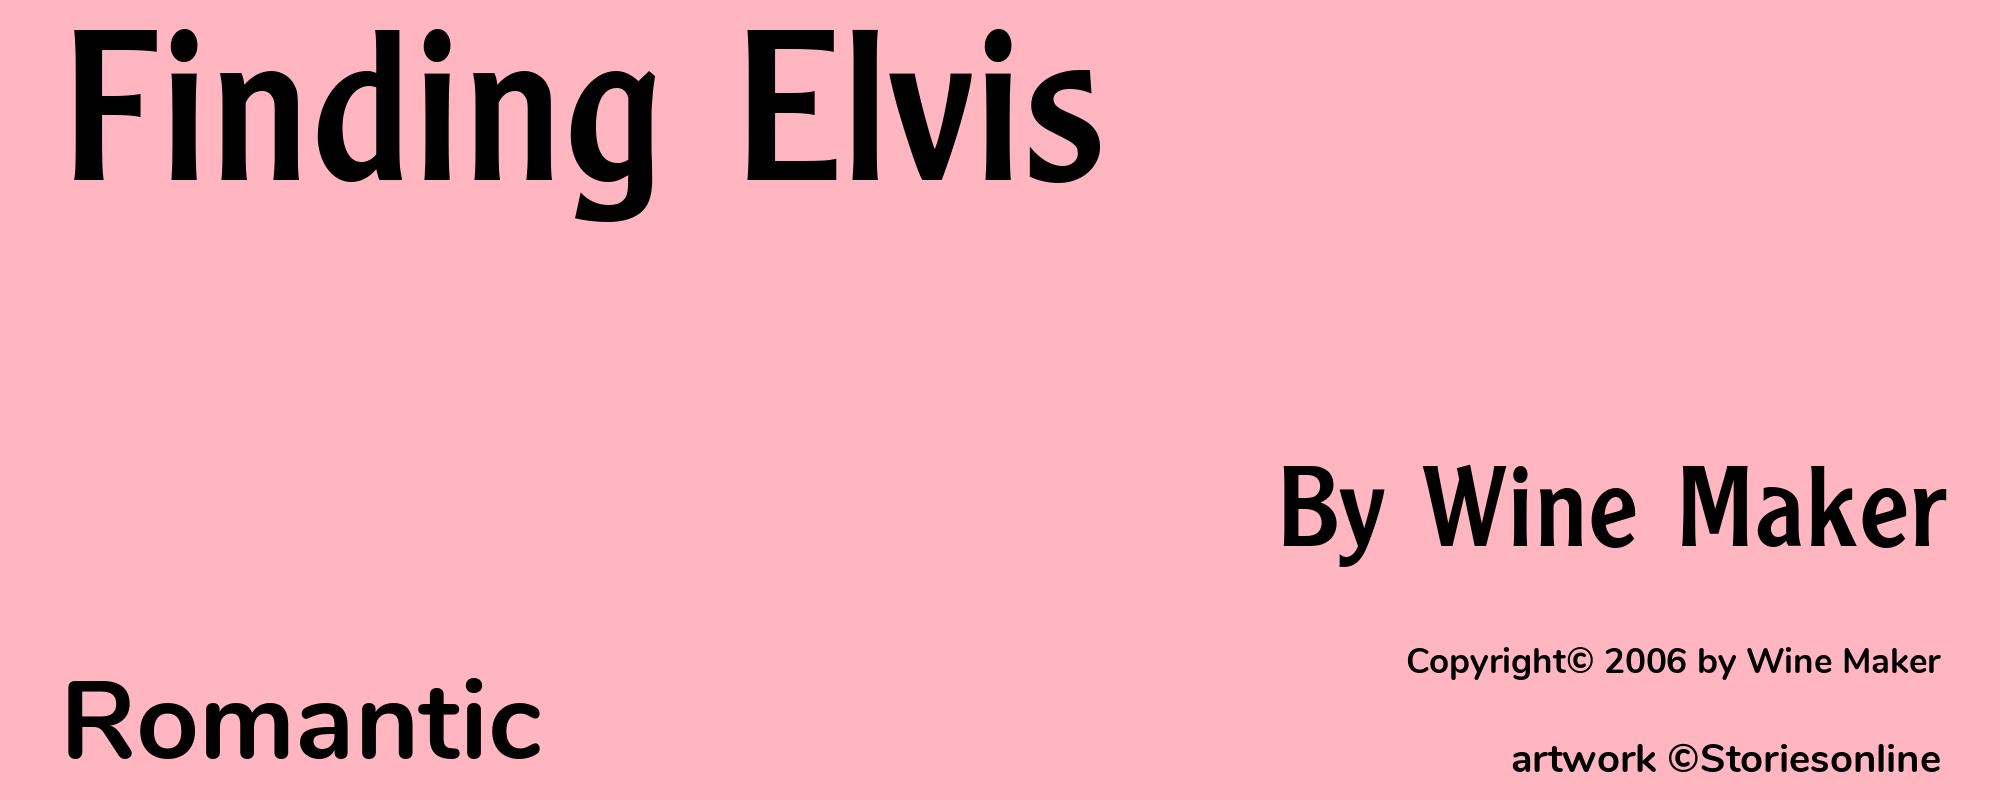 Finding Elvis - Cover